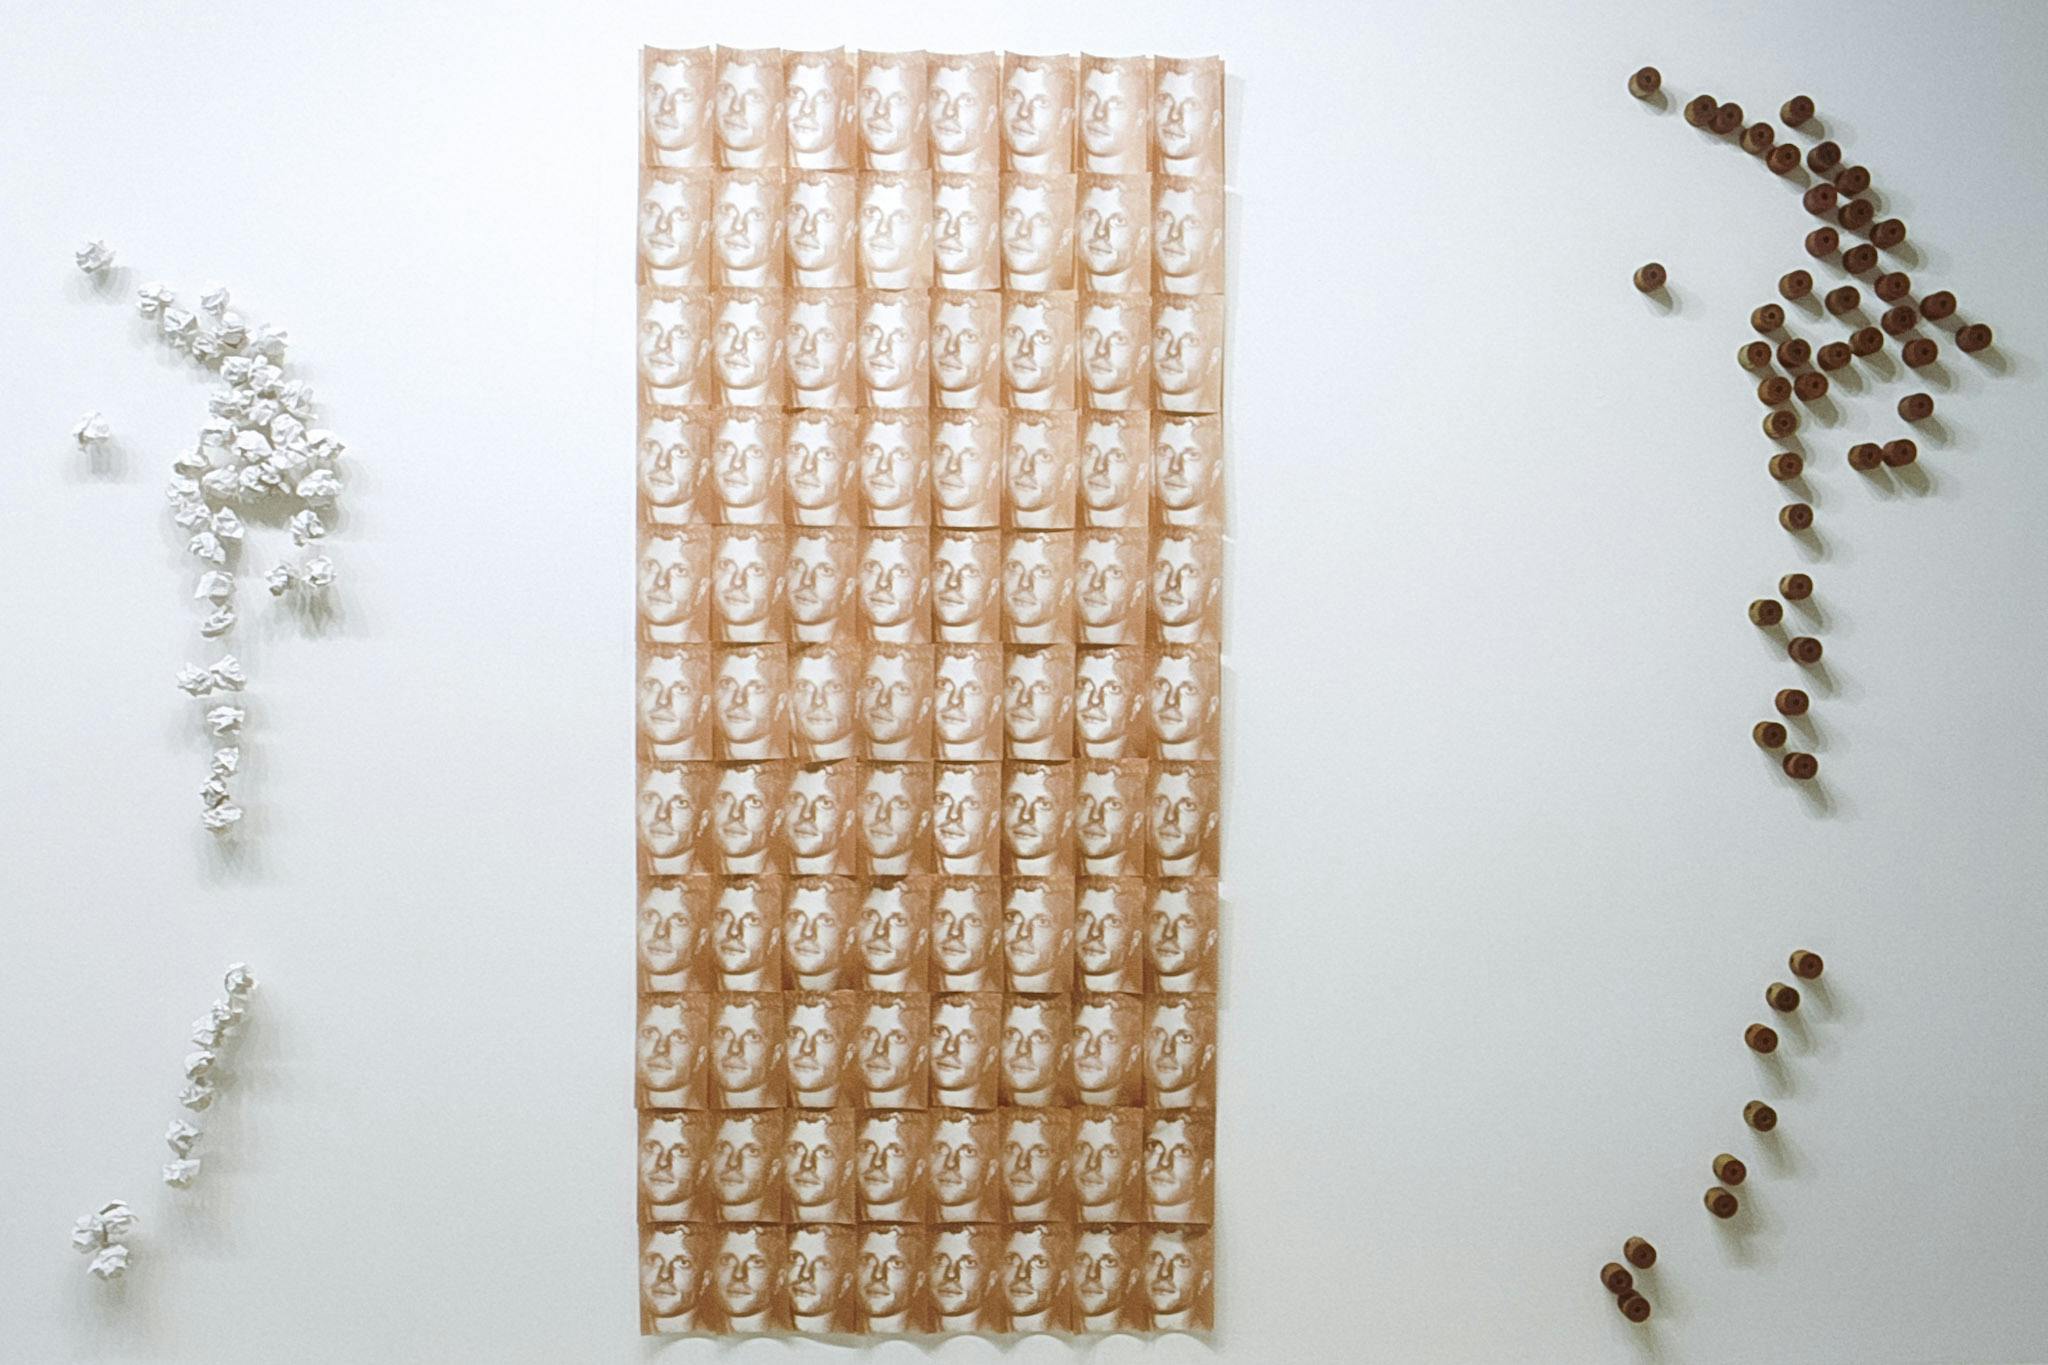 Identical images of a man’s face are installed on the gallery wall. In total 88 of those images, printed in orange-brown and closely aligned to each other, resembles a chocolate bar. 